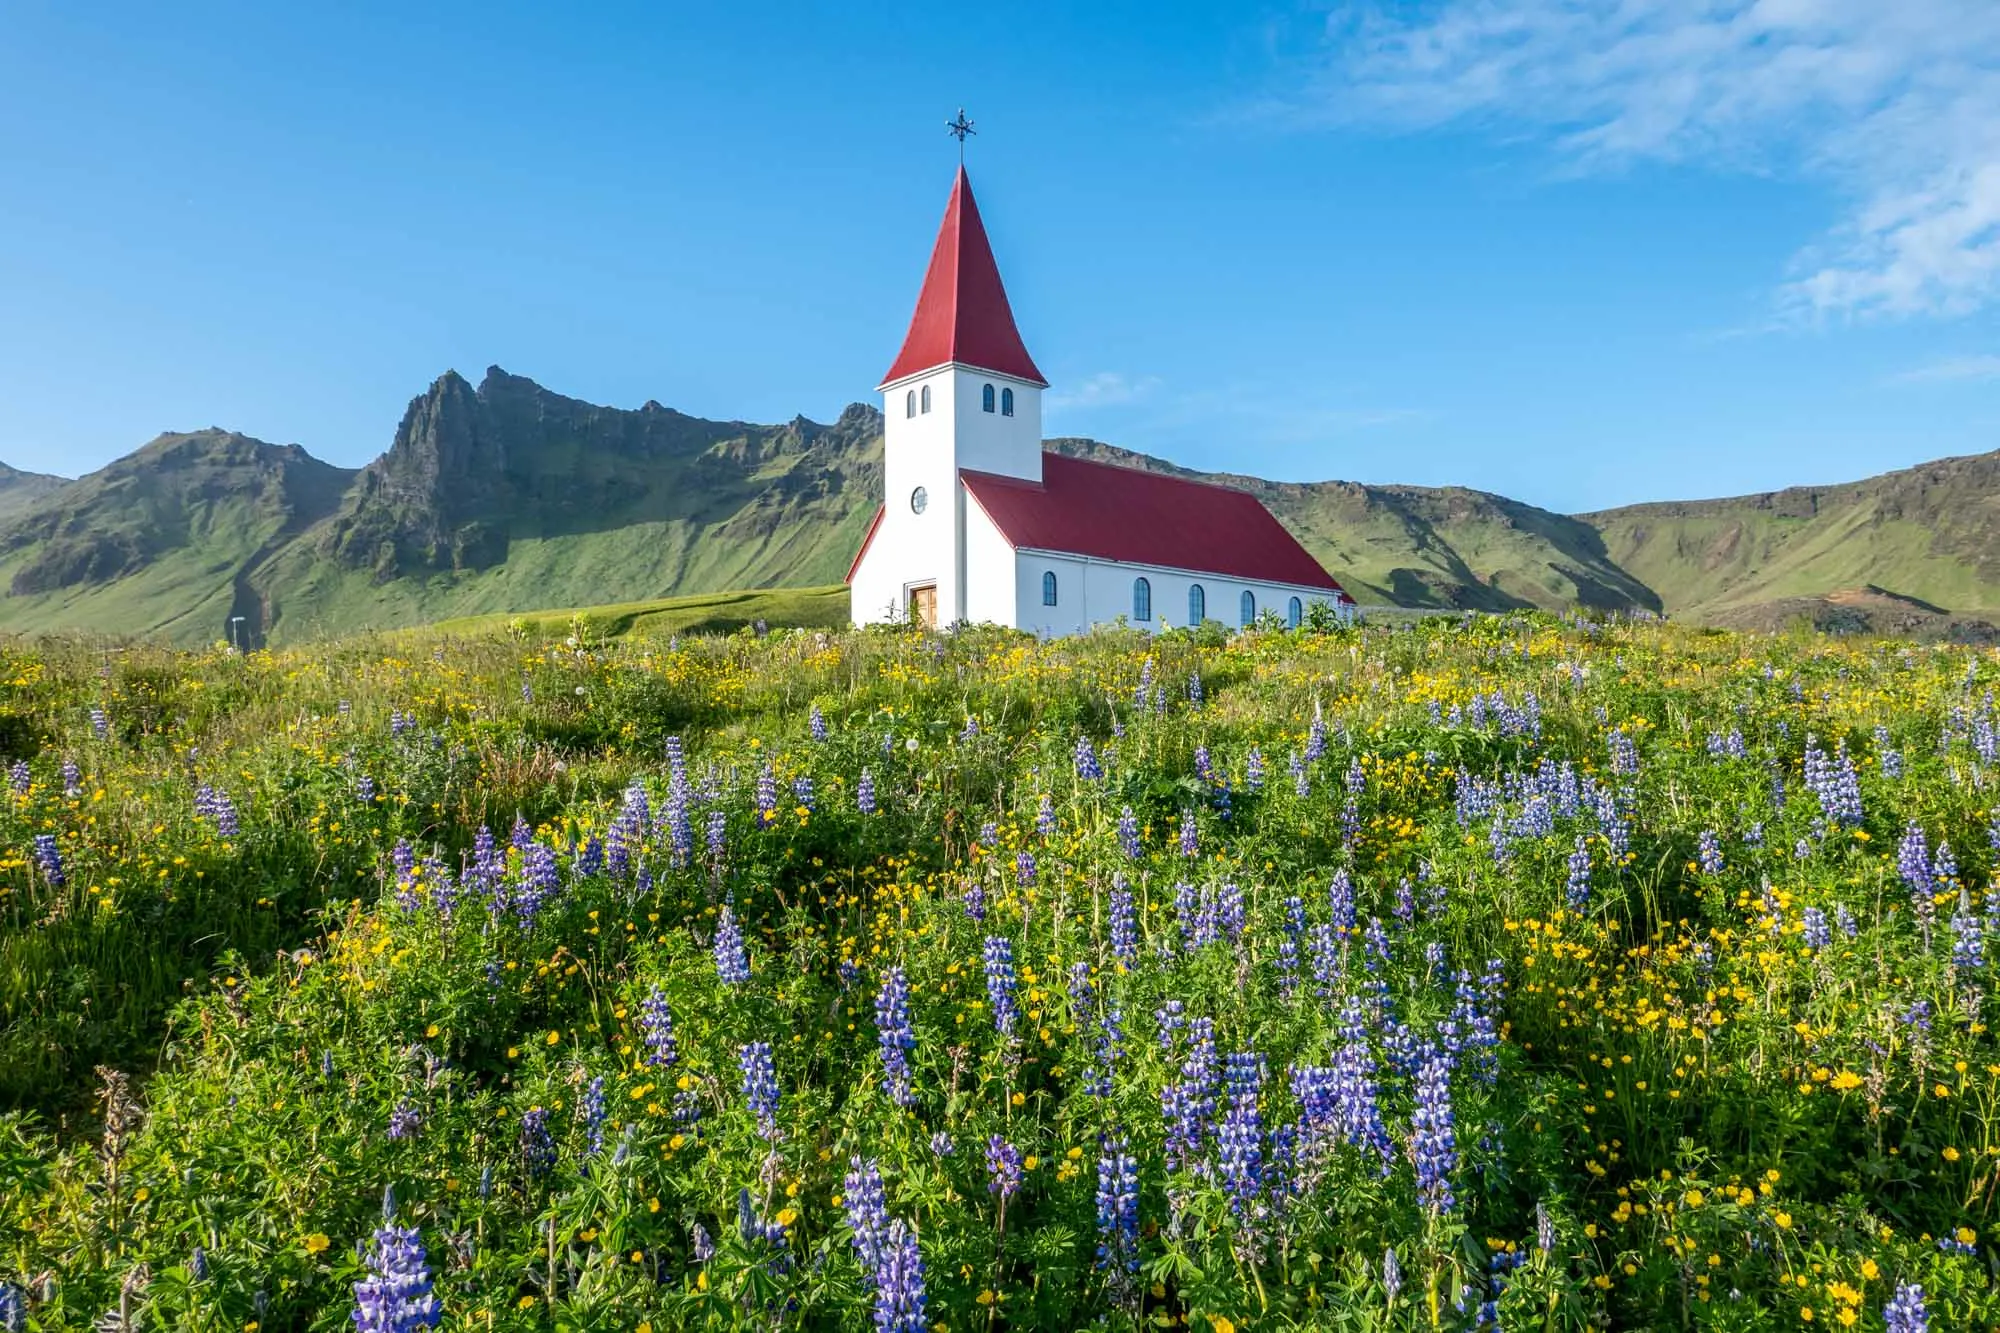 Red church on hill with purple flowers